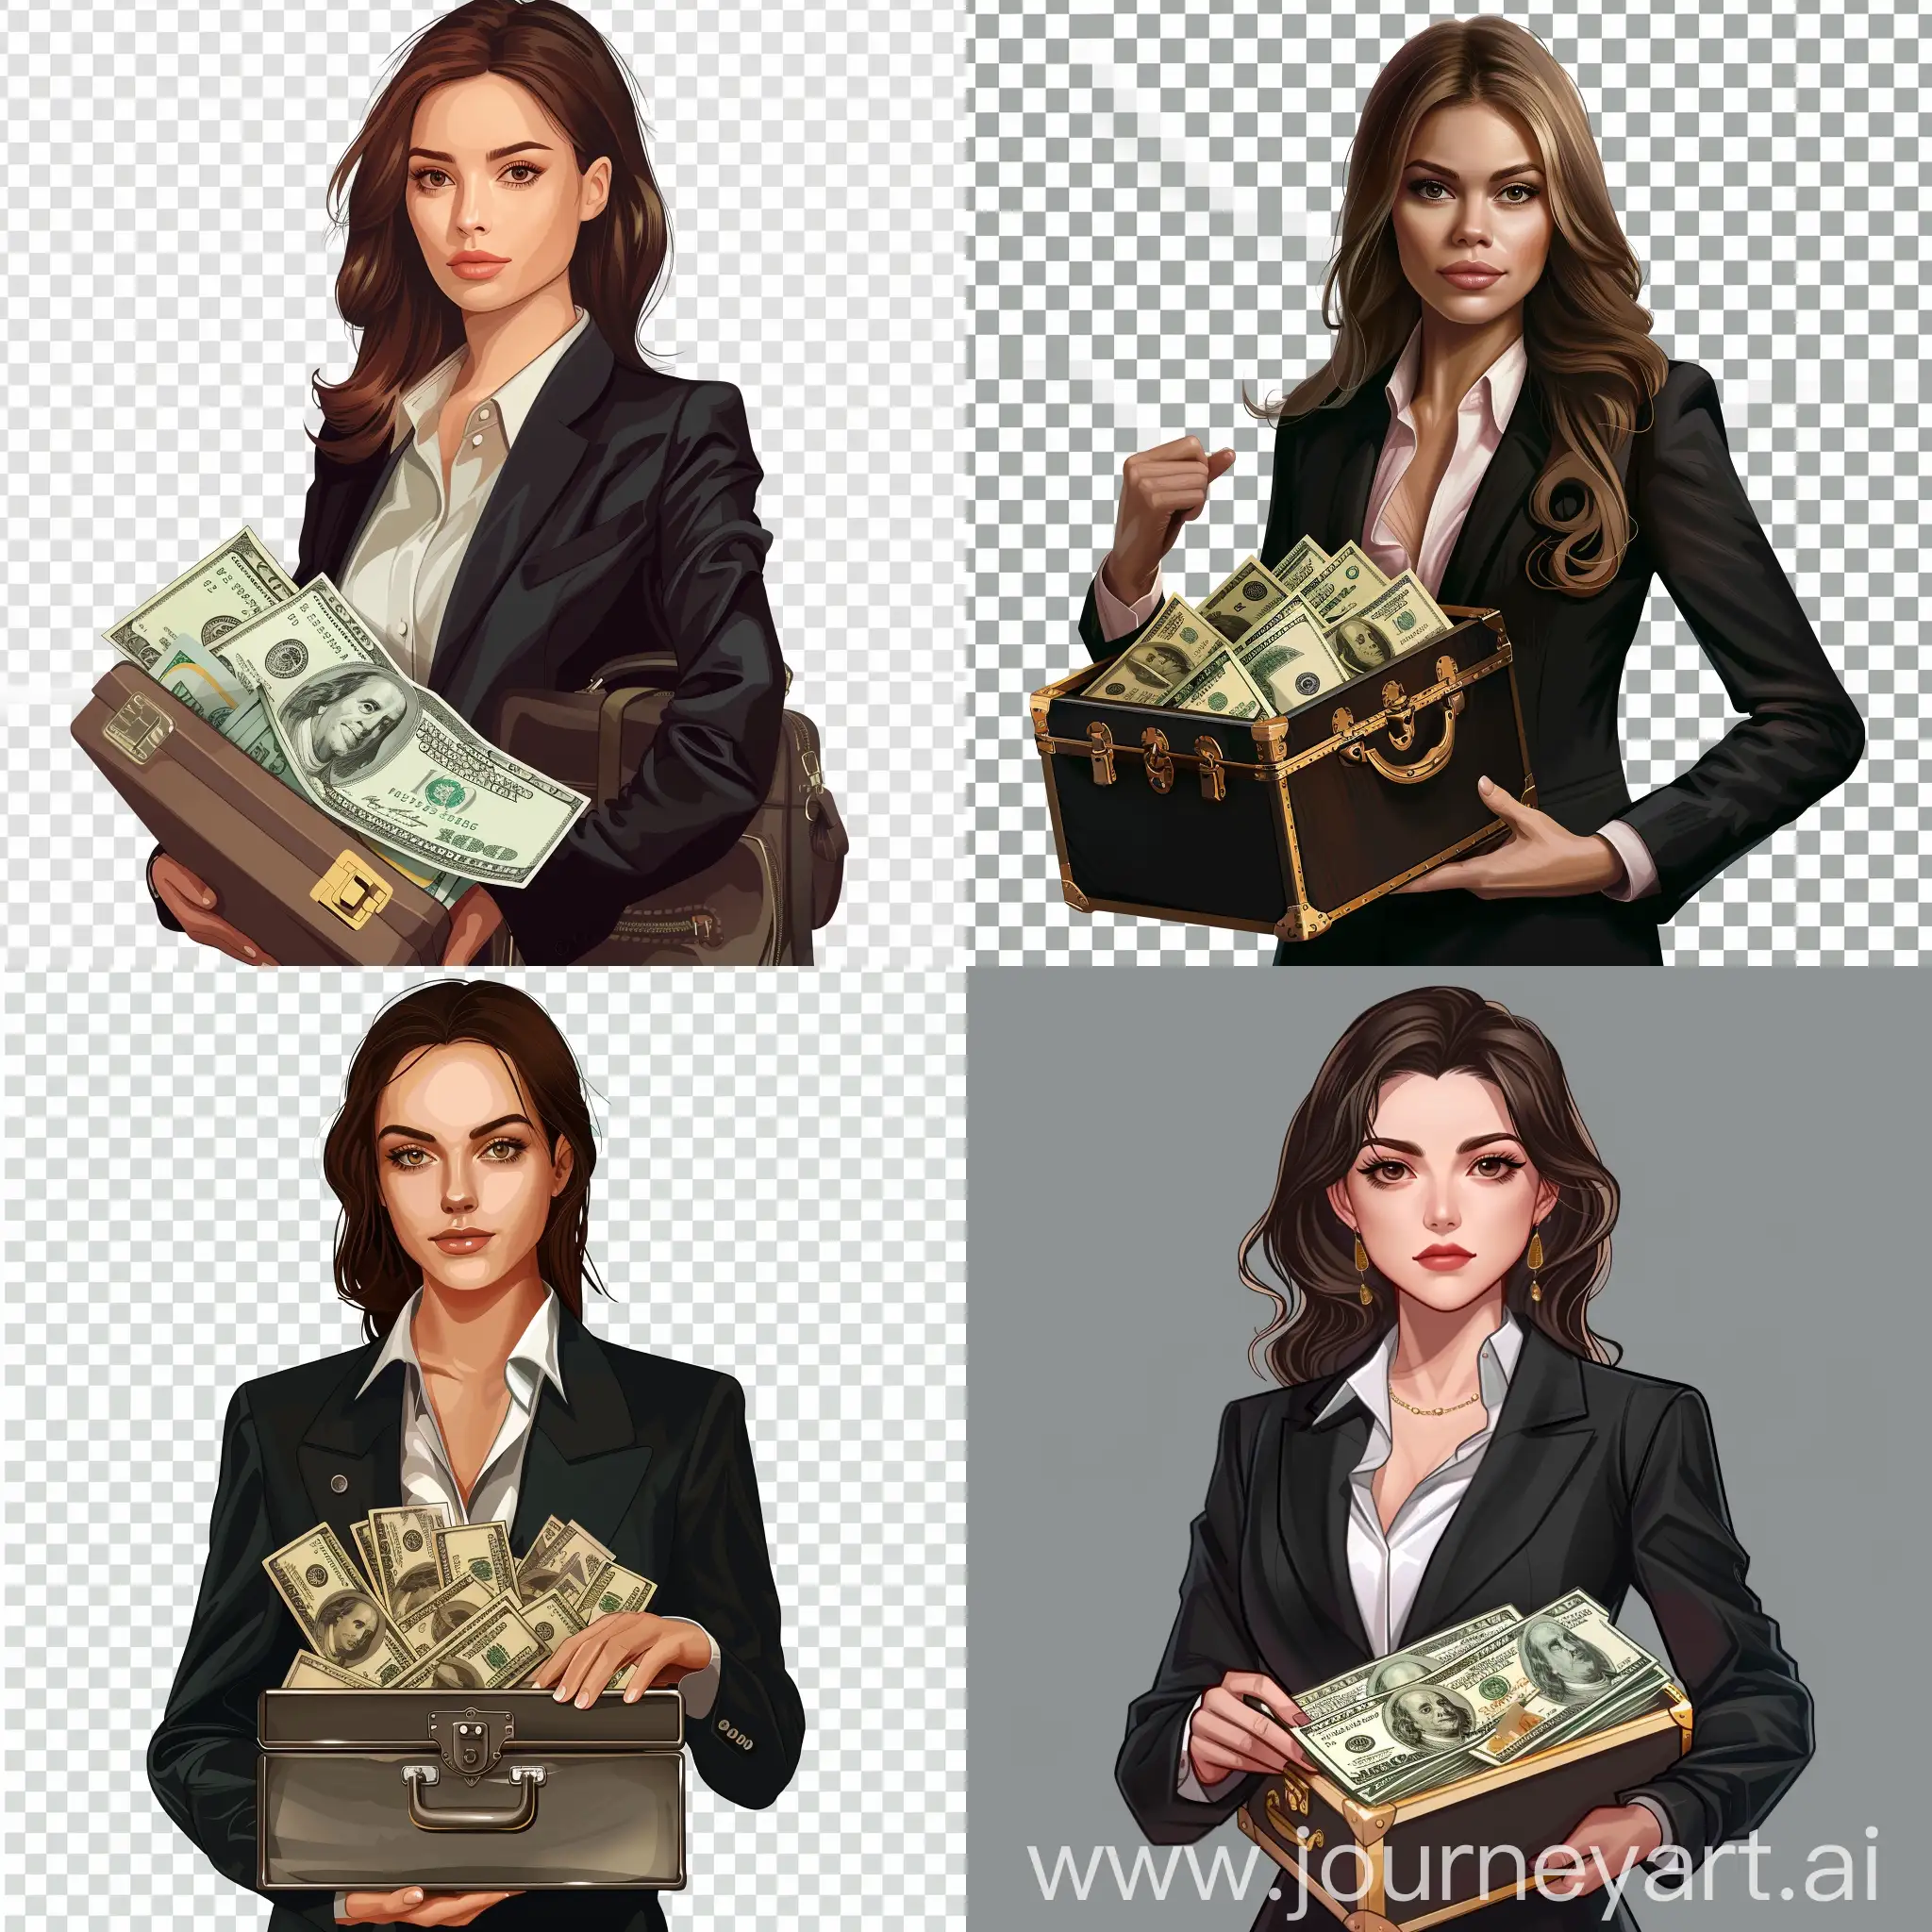 Businesswoman-Holding-Briefcase-with-Dollars-in-Office-Attire